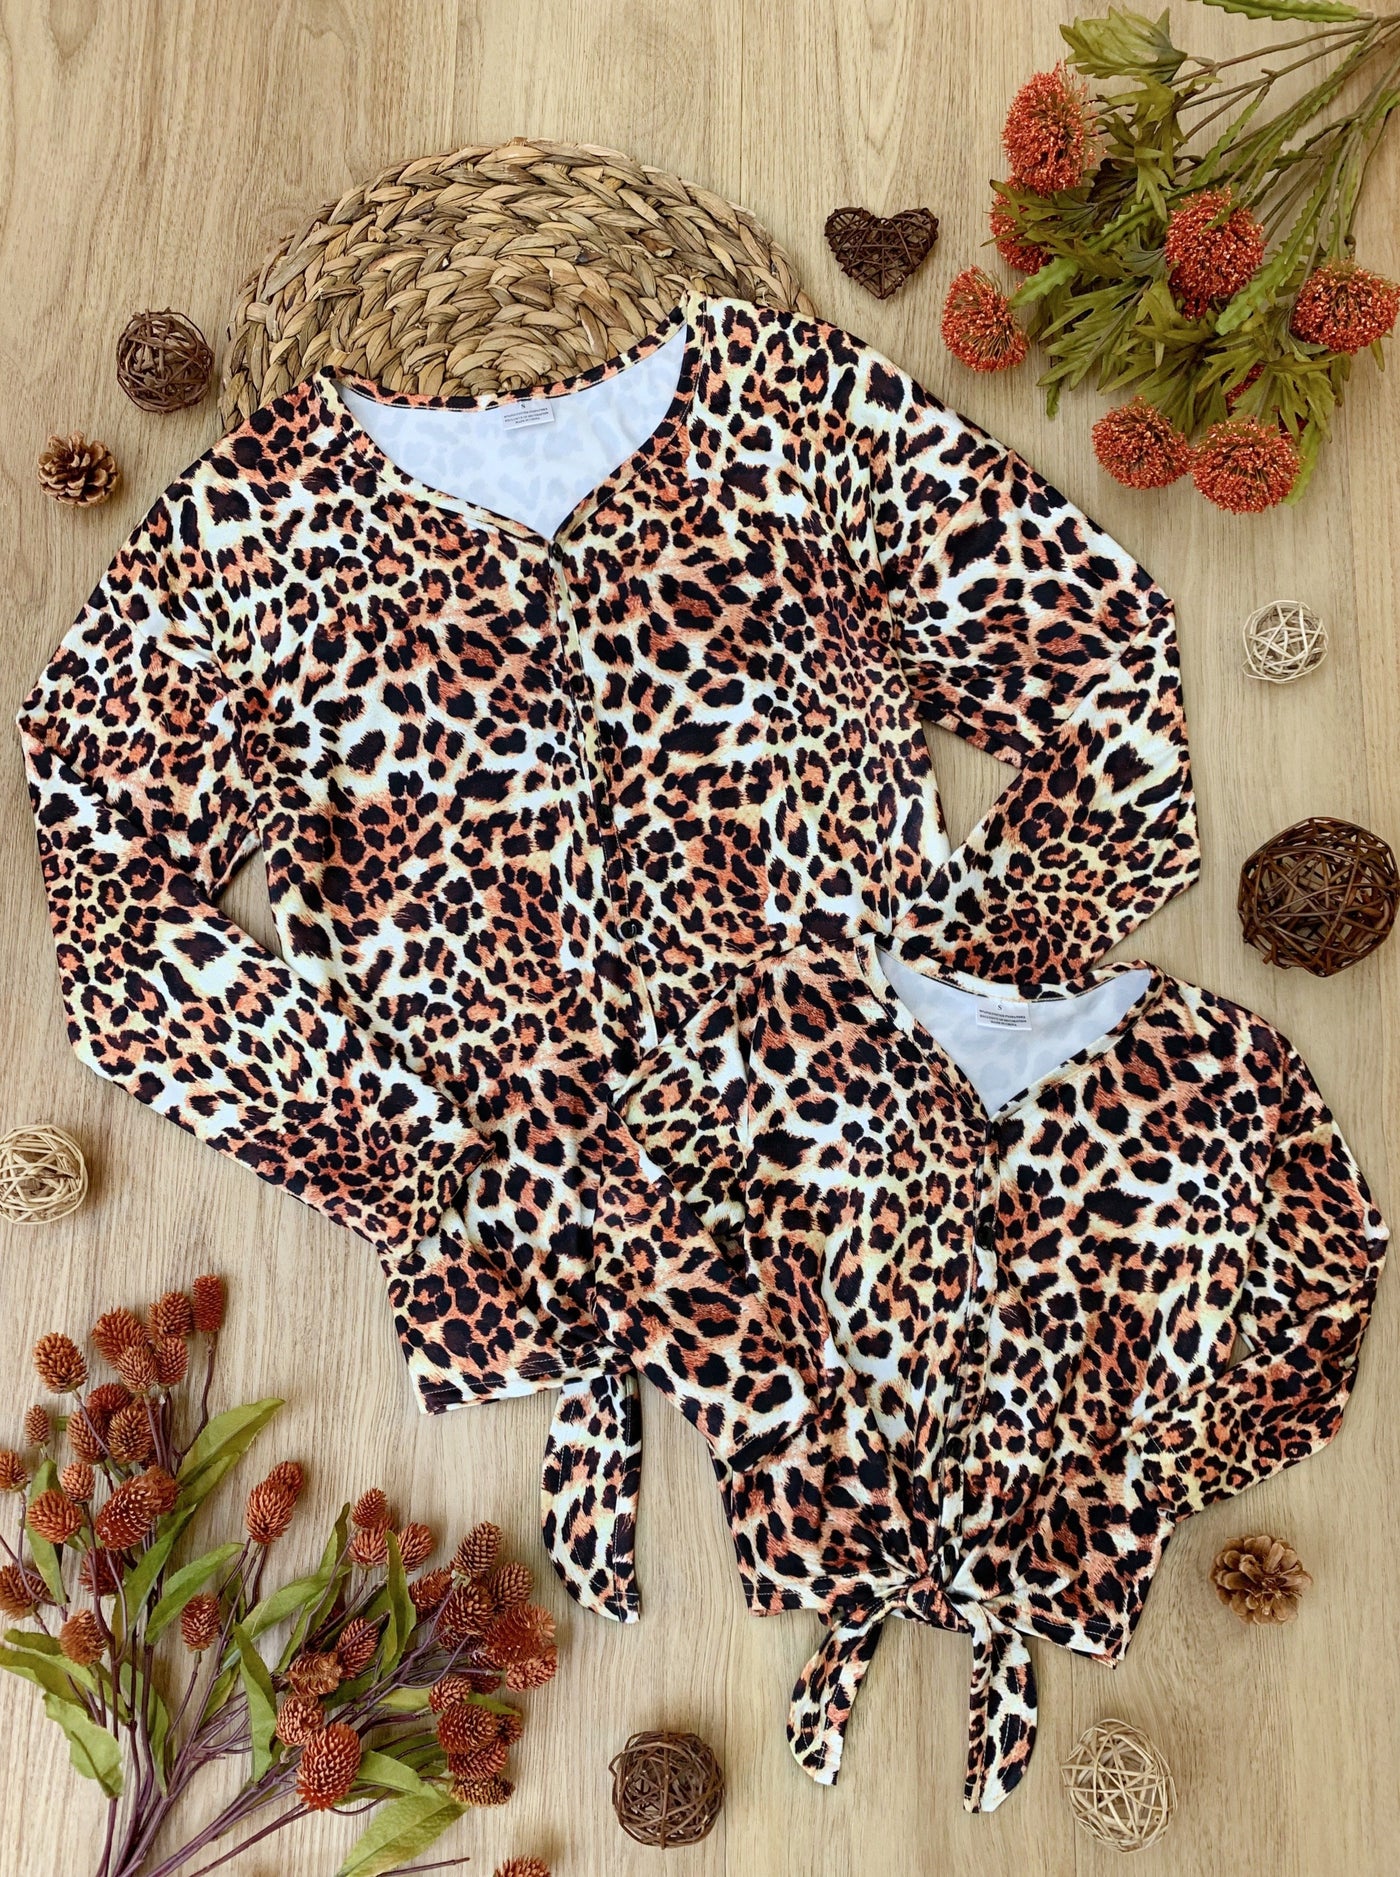 Mommy and Me Matching Outfits | Animal Print Knot Hem Tops